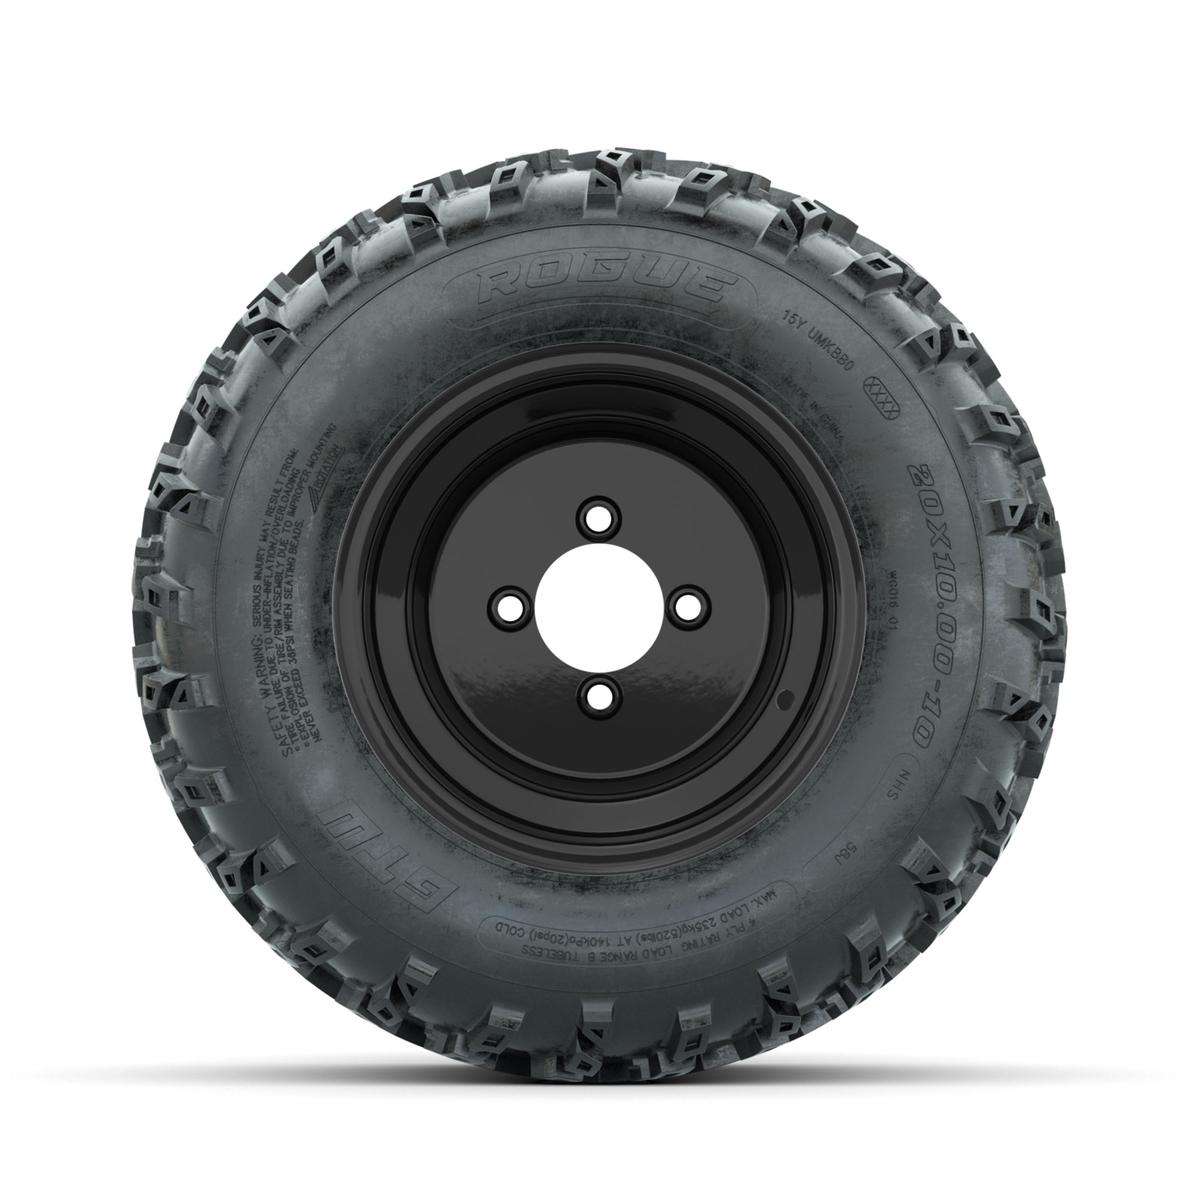 GTW Steel Black 10 in Wheels with 20x10.00-10 Rogue All Terrain Tires – Full Set